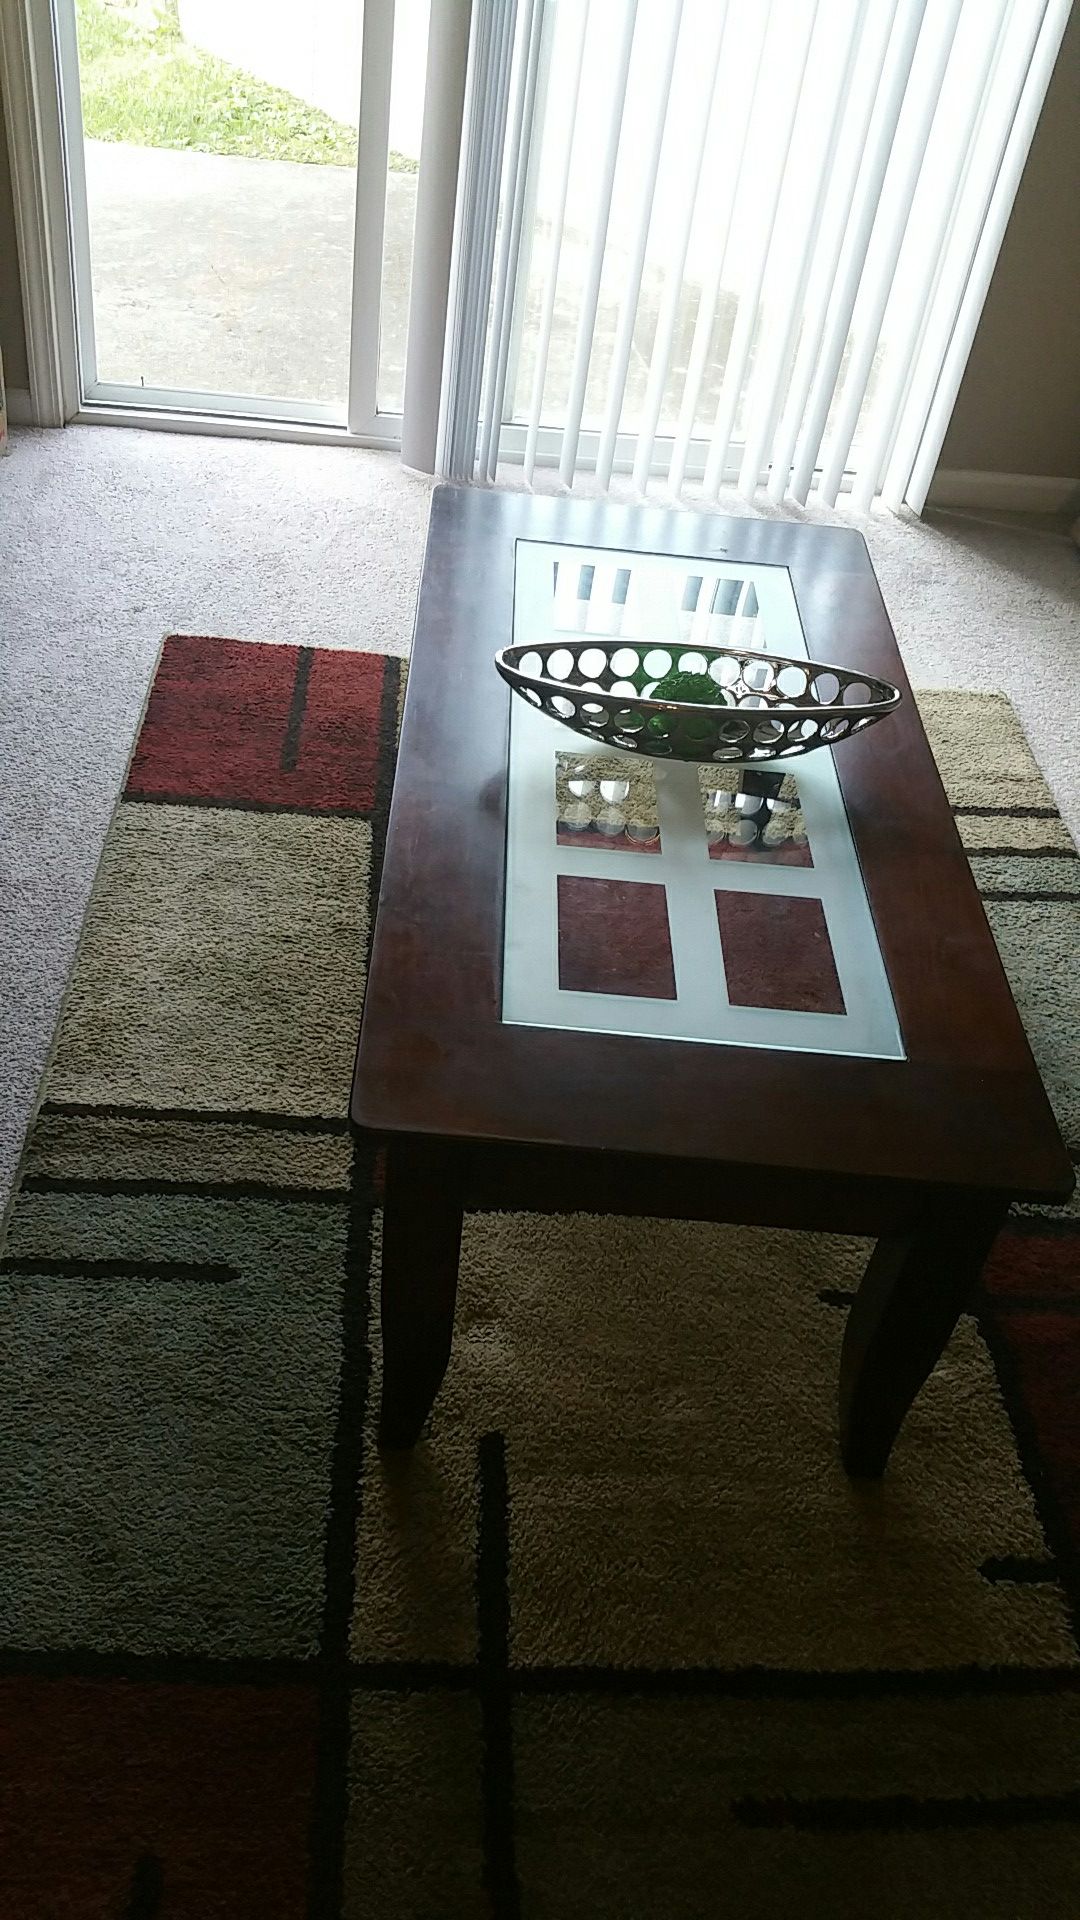 Center table, coffee tables and lamps